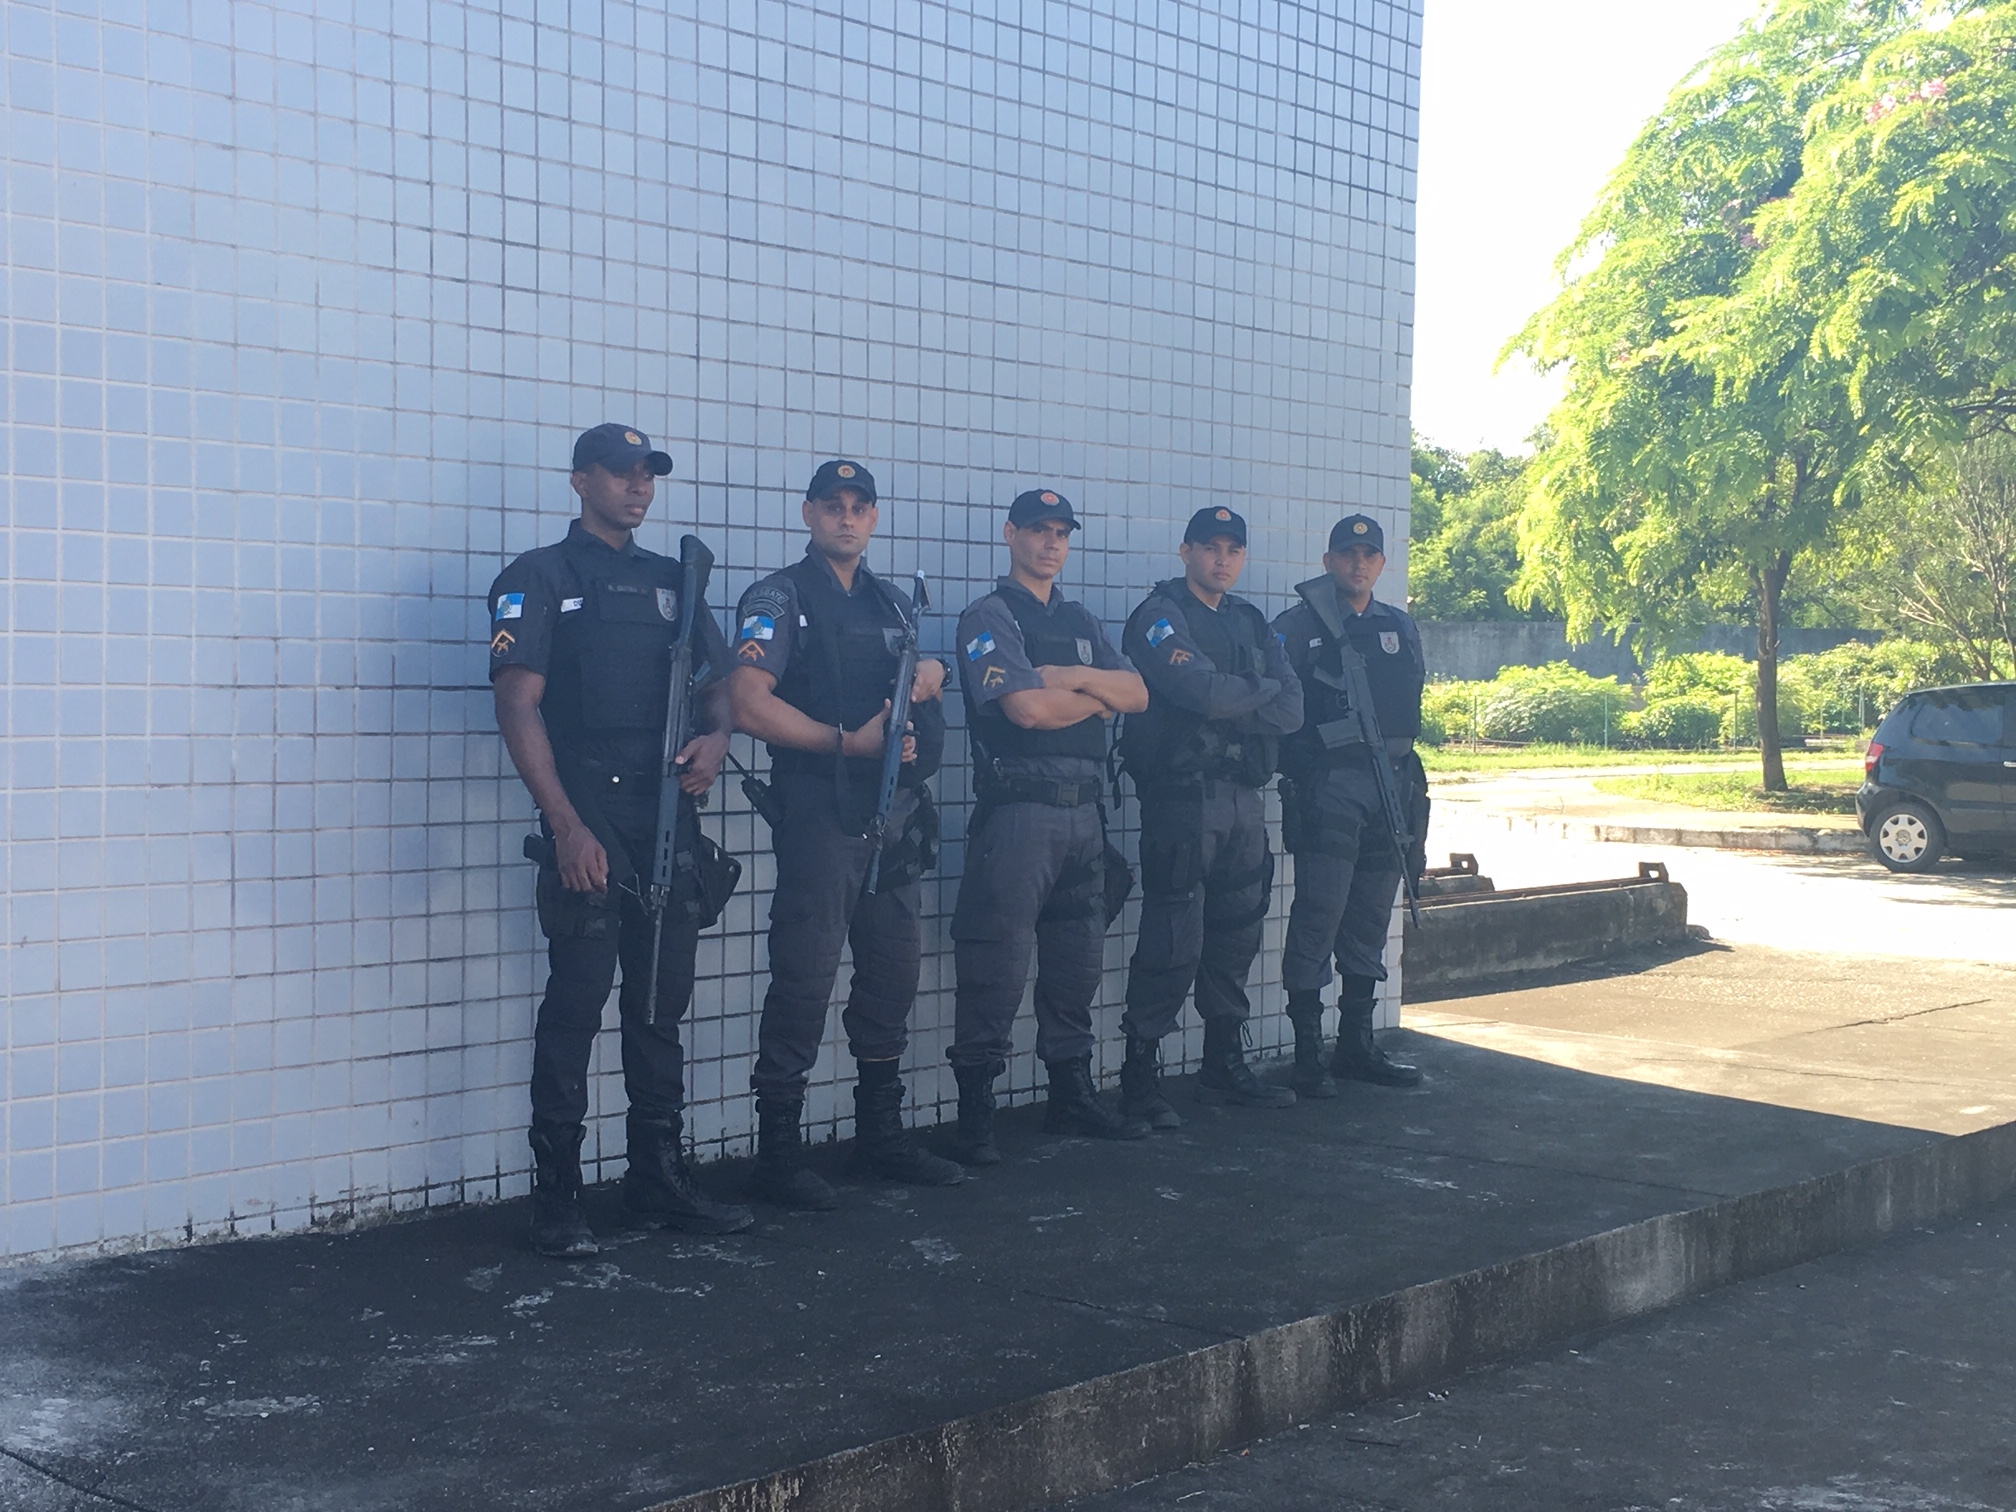 The security team that escorted OTL to the Algeria water treatment facility.